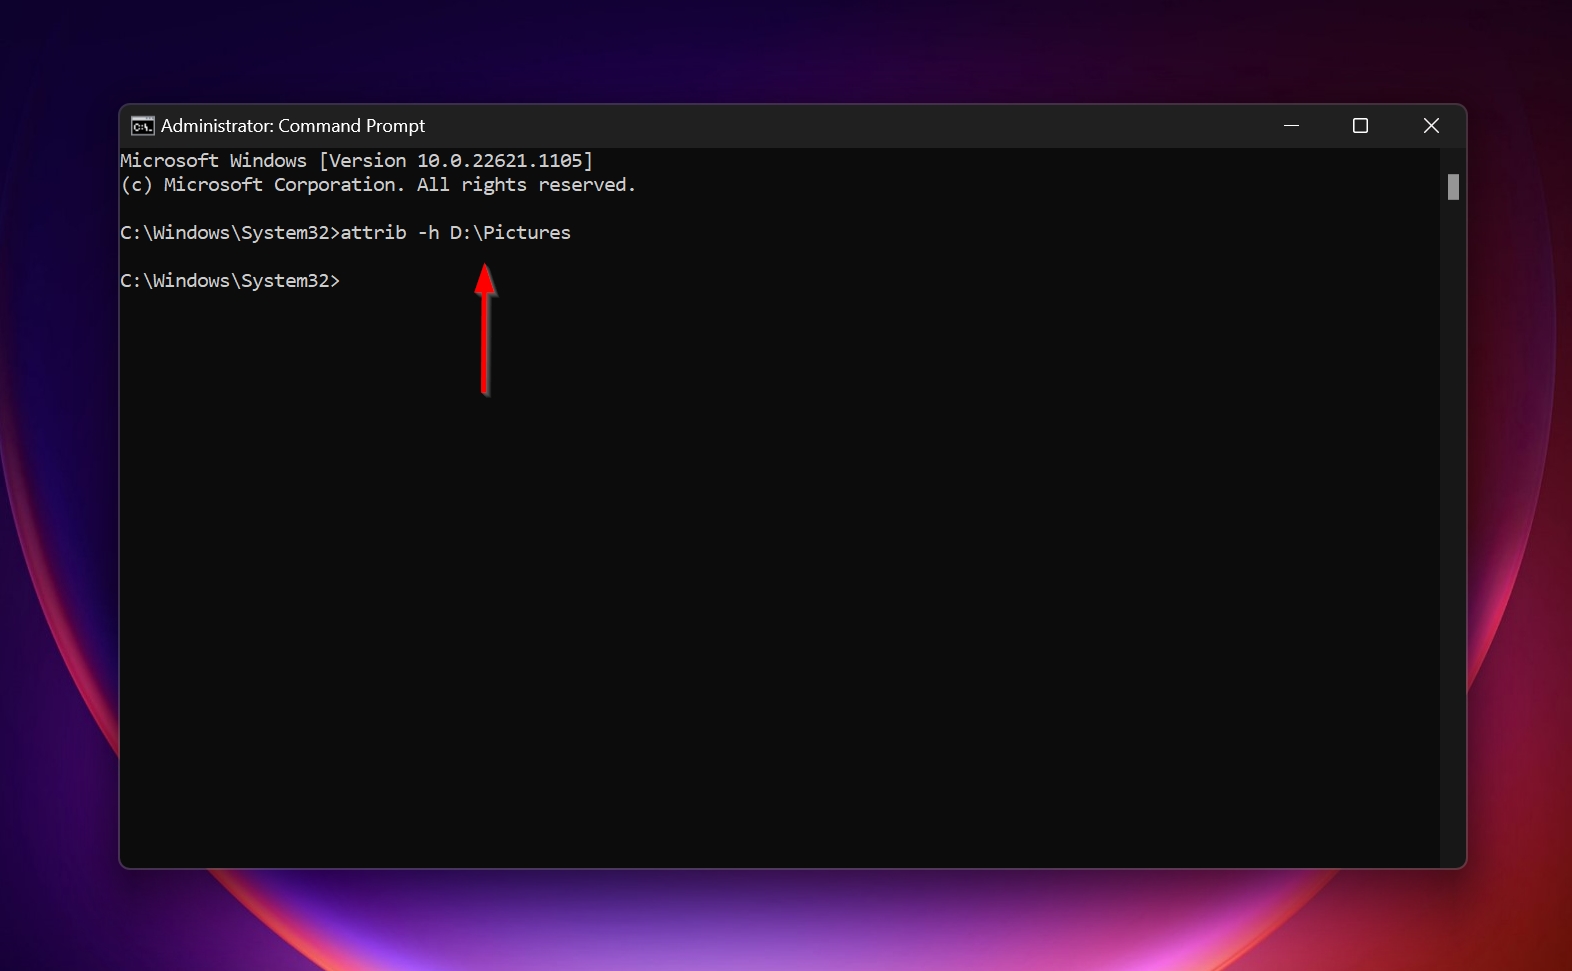 The attrib command in Windows Command Prompt.